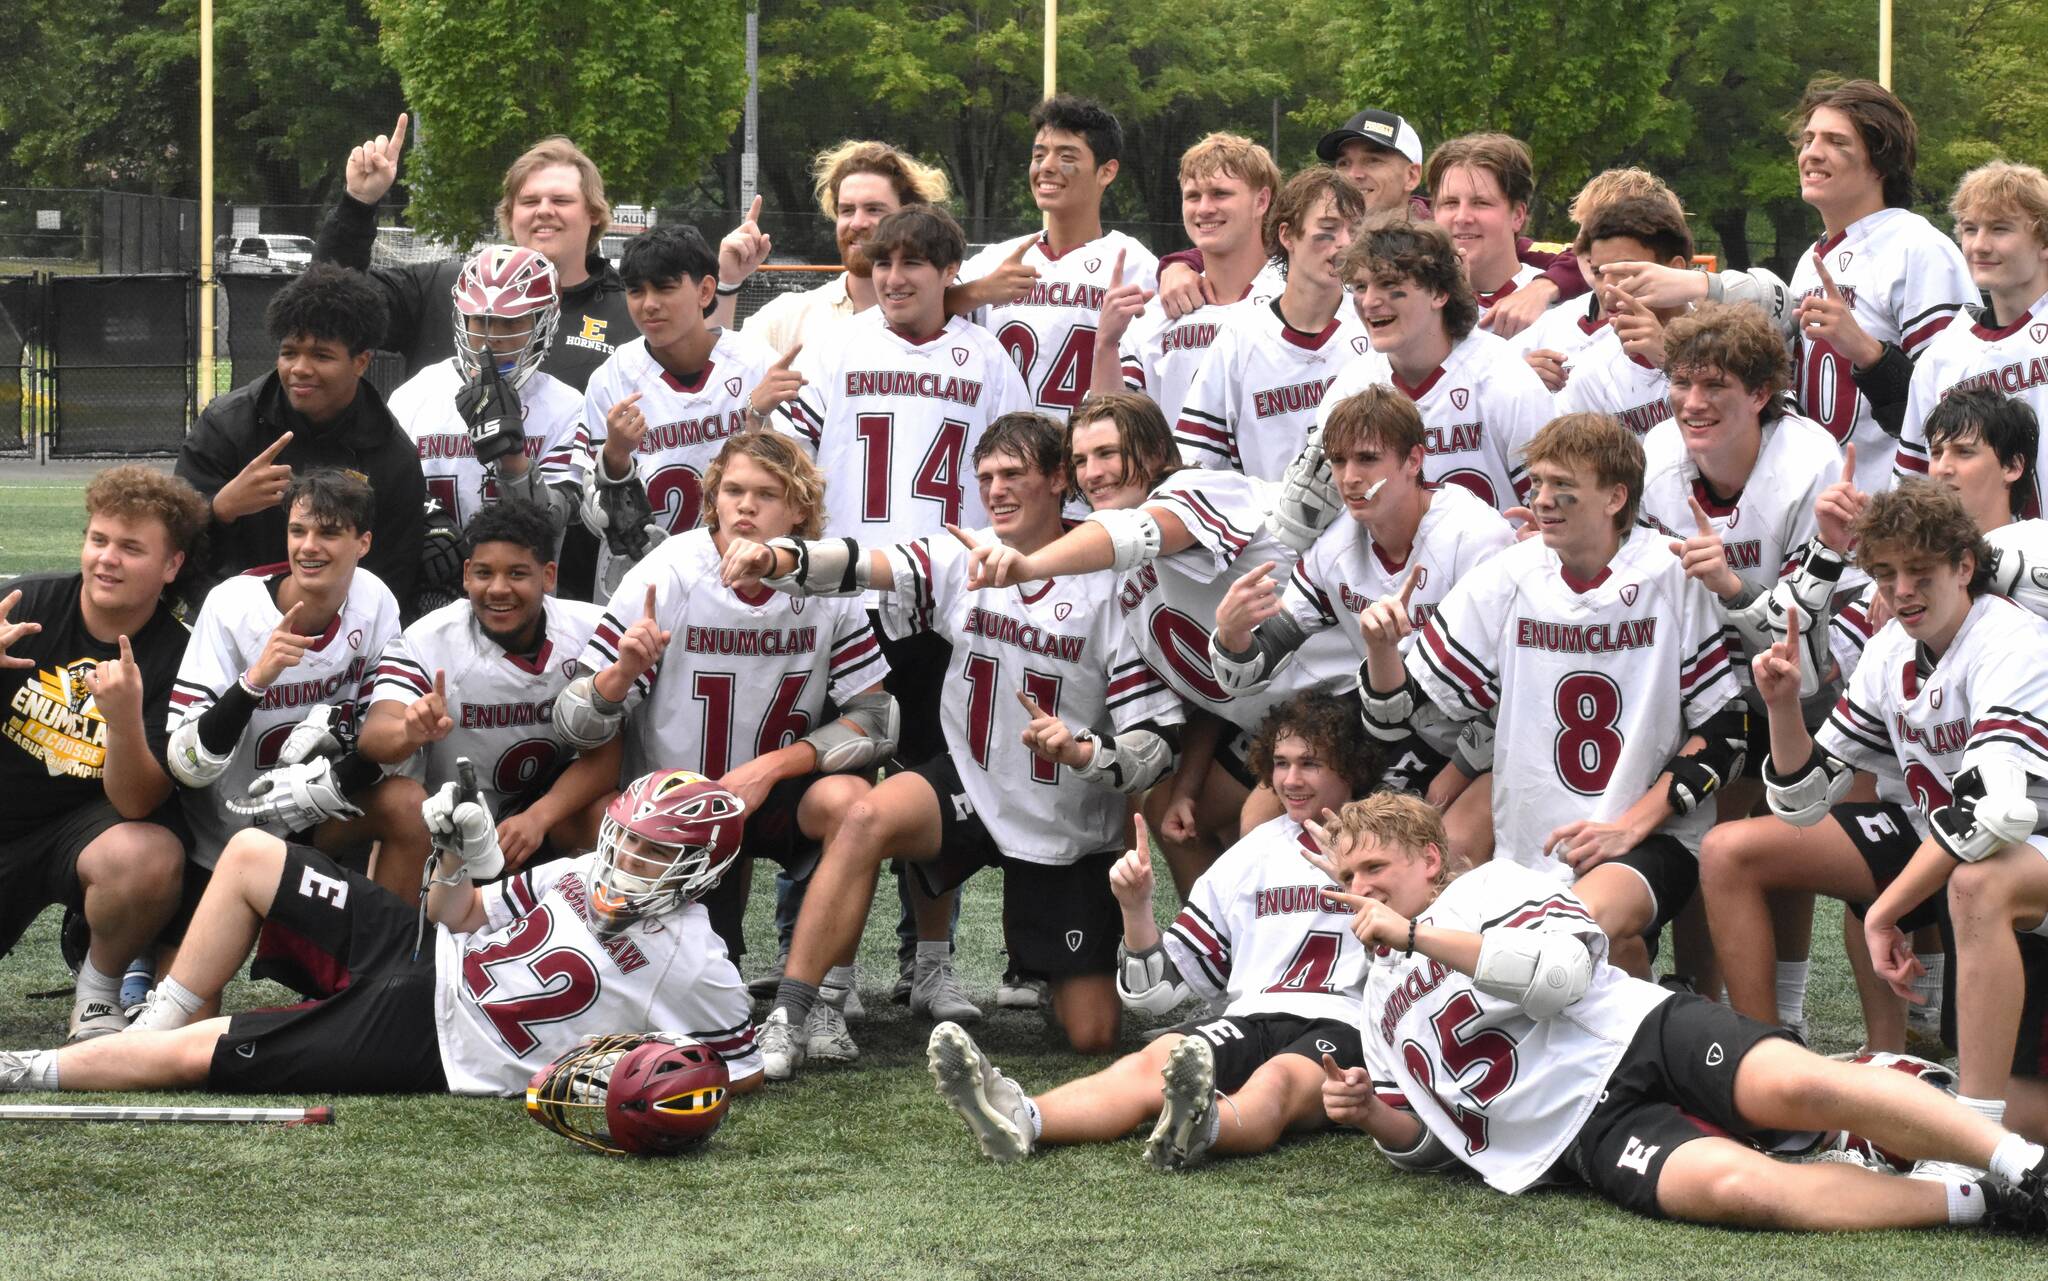 The Enumclaw High lacrosse team celebrates with a mid-field photo, moments after capturing the 1A/2A state championship. The Hornets took the title with a convincing victory over Orting at the Starfire complex in Tukwila. Photo by Kevin Hanson